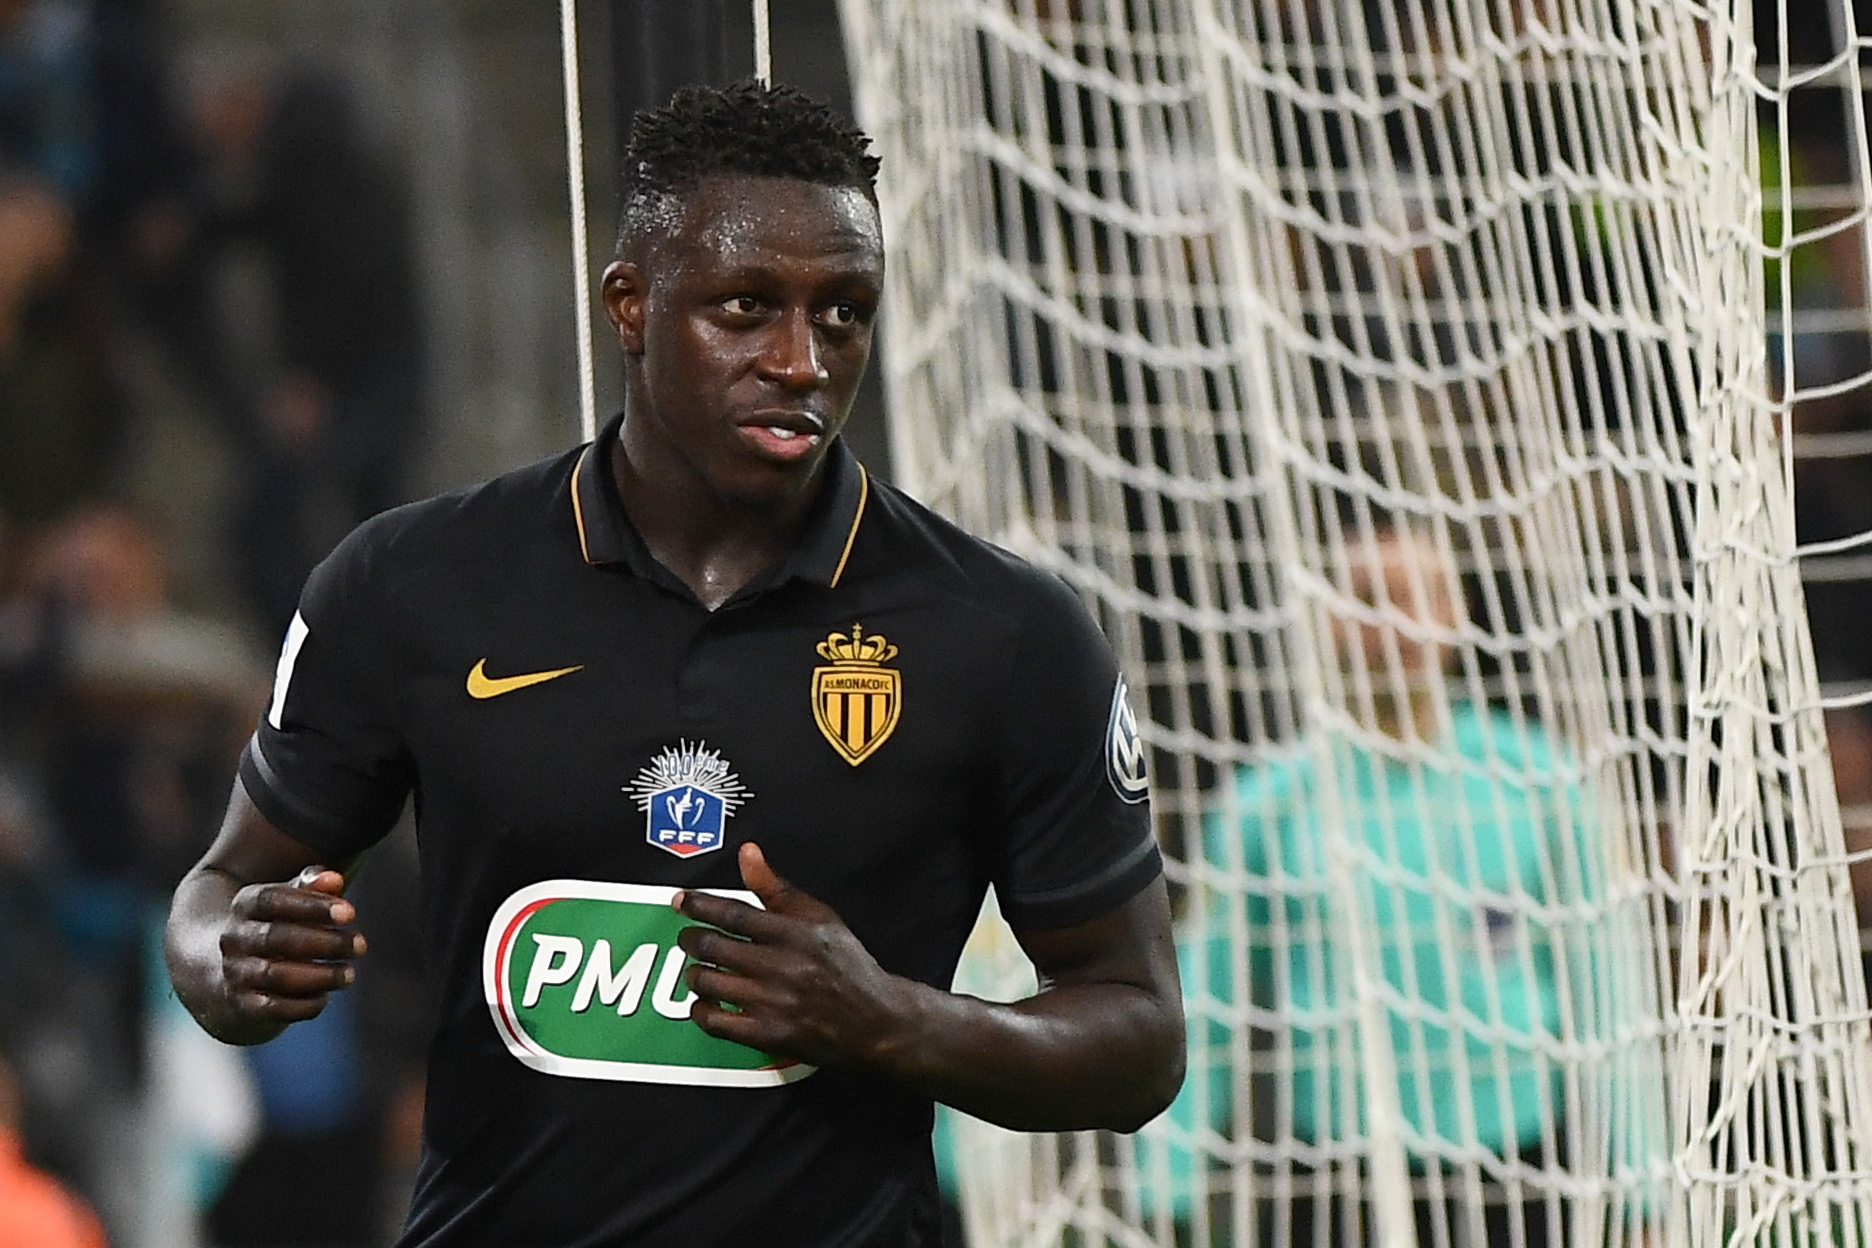 Monaco's French defender Benjamin Mendy reacts after scoring his team's third goal during the French Cup football match Marseille (OM) vs Monaco (ASM) on March 1, 2017 at the Velodrome stadium in Marseille, southern France.   / AFP PHOTO / BORIS HORVAT        (Photo credit should read BORIS HORVAT/AFP/Getty Images)